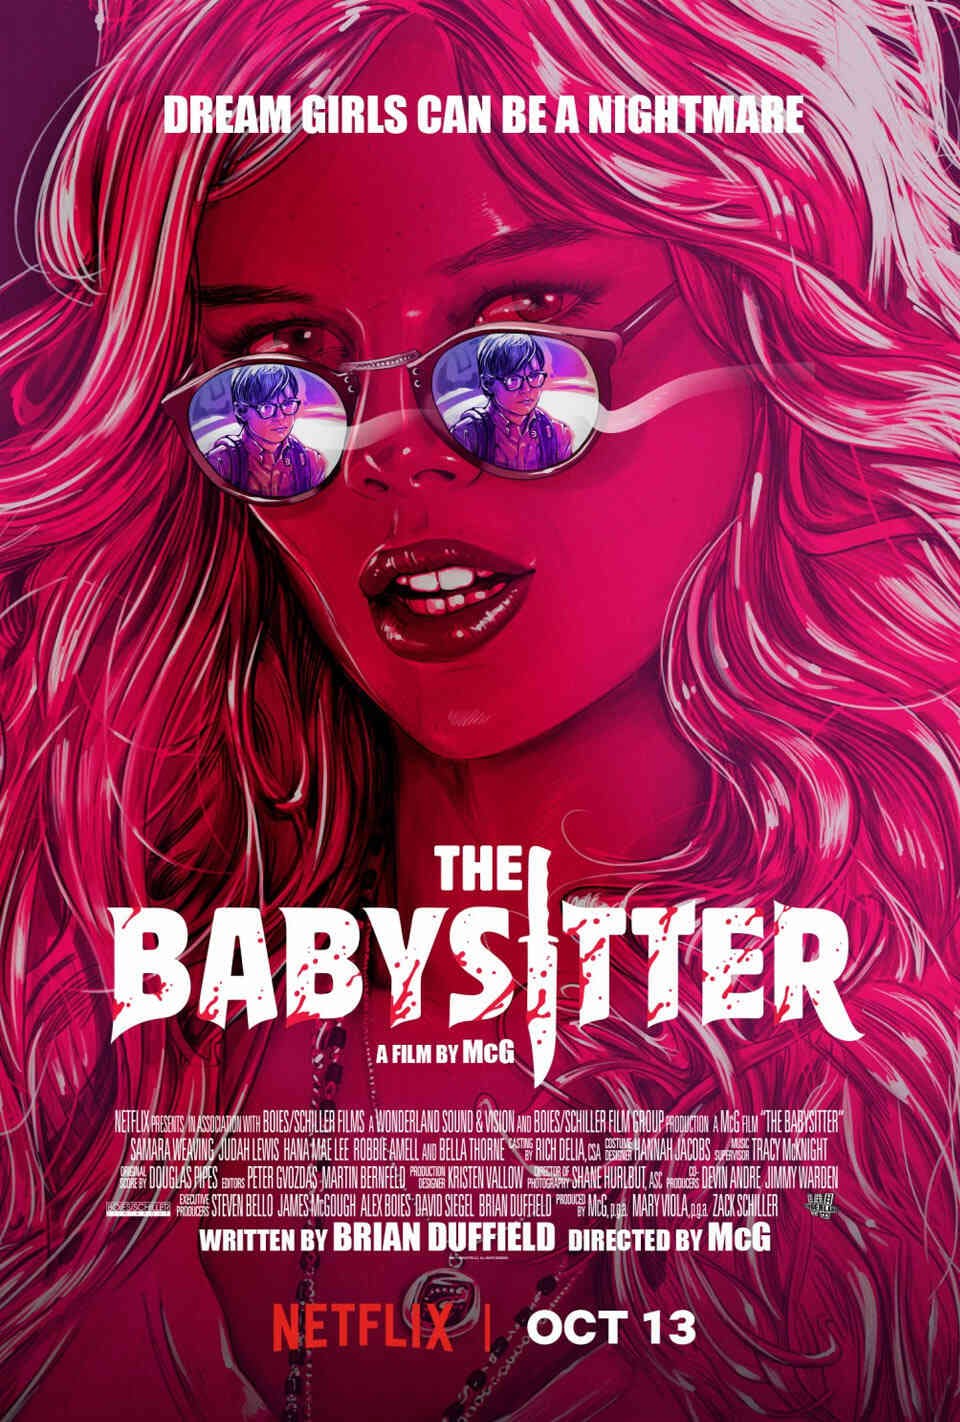 Read The Babysitter screenplay (poster)